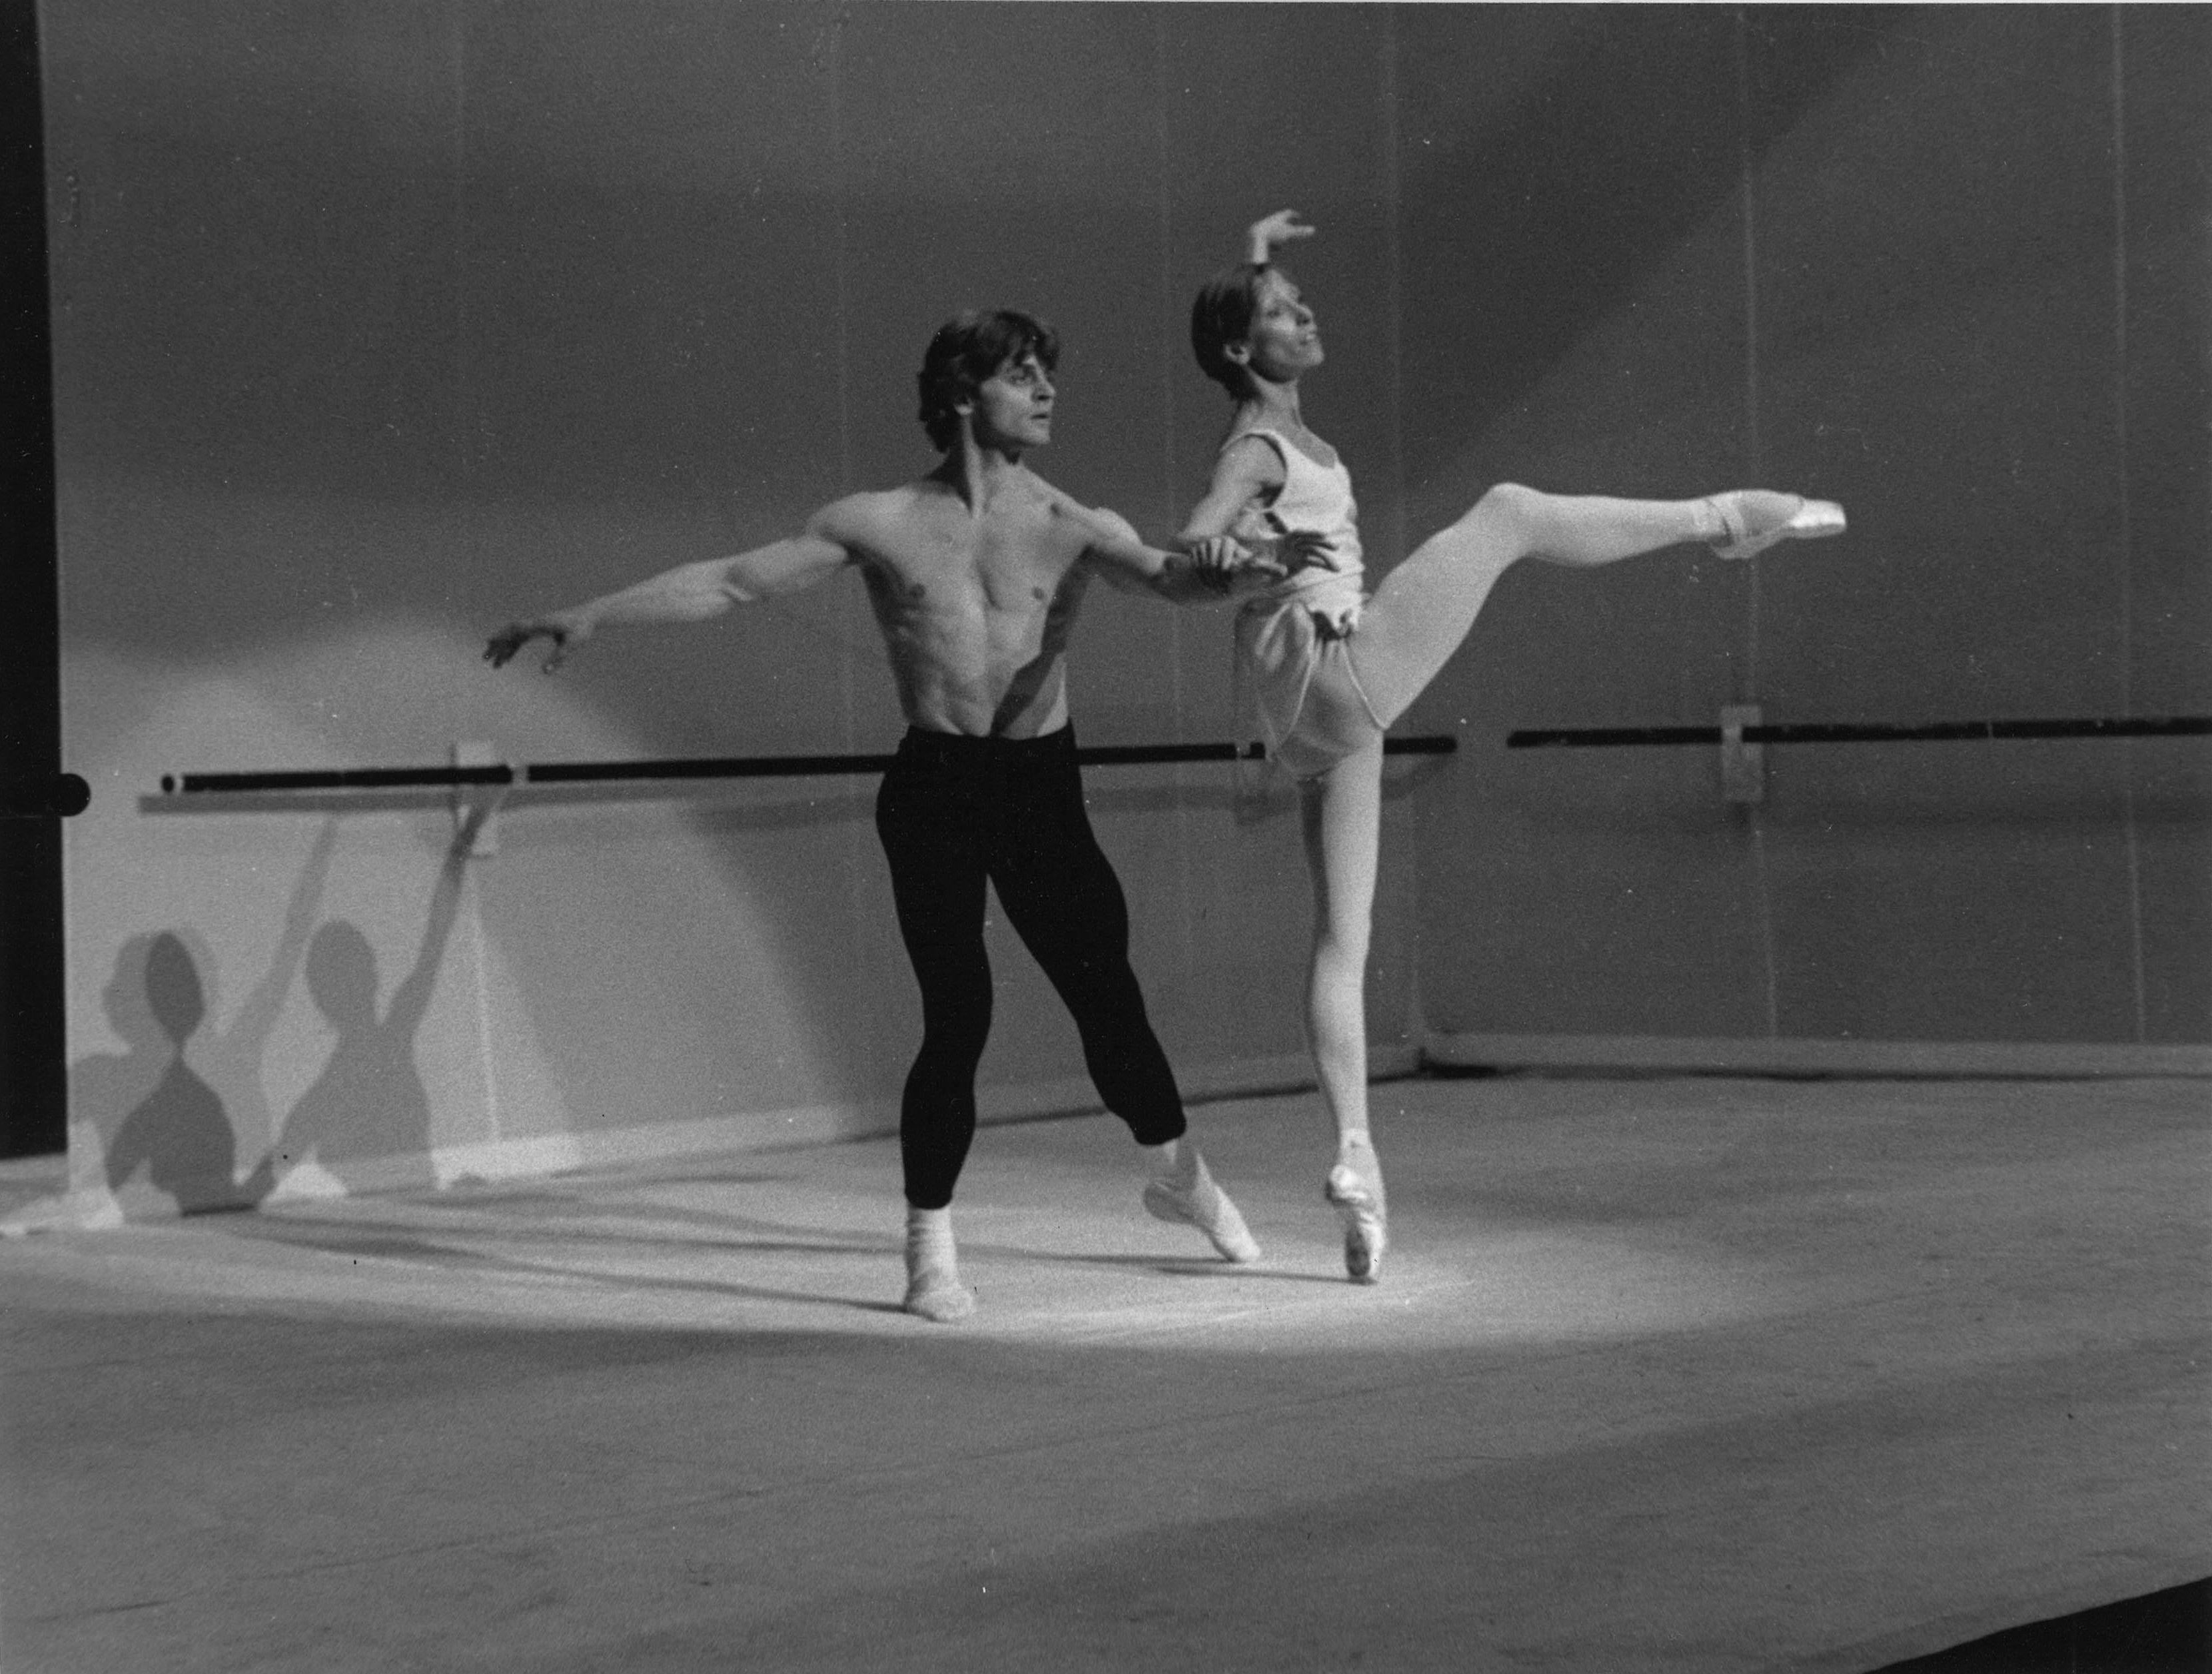 On the set evoking a ballet studio, Baryshnikov supports Makarova with an extended arm as she balances in attitude front. Neither look to each other, but instead out, as though to their reflections in a mirror.